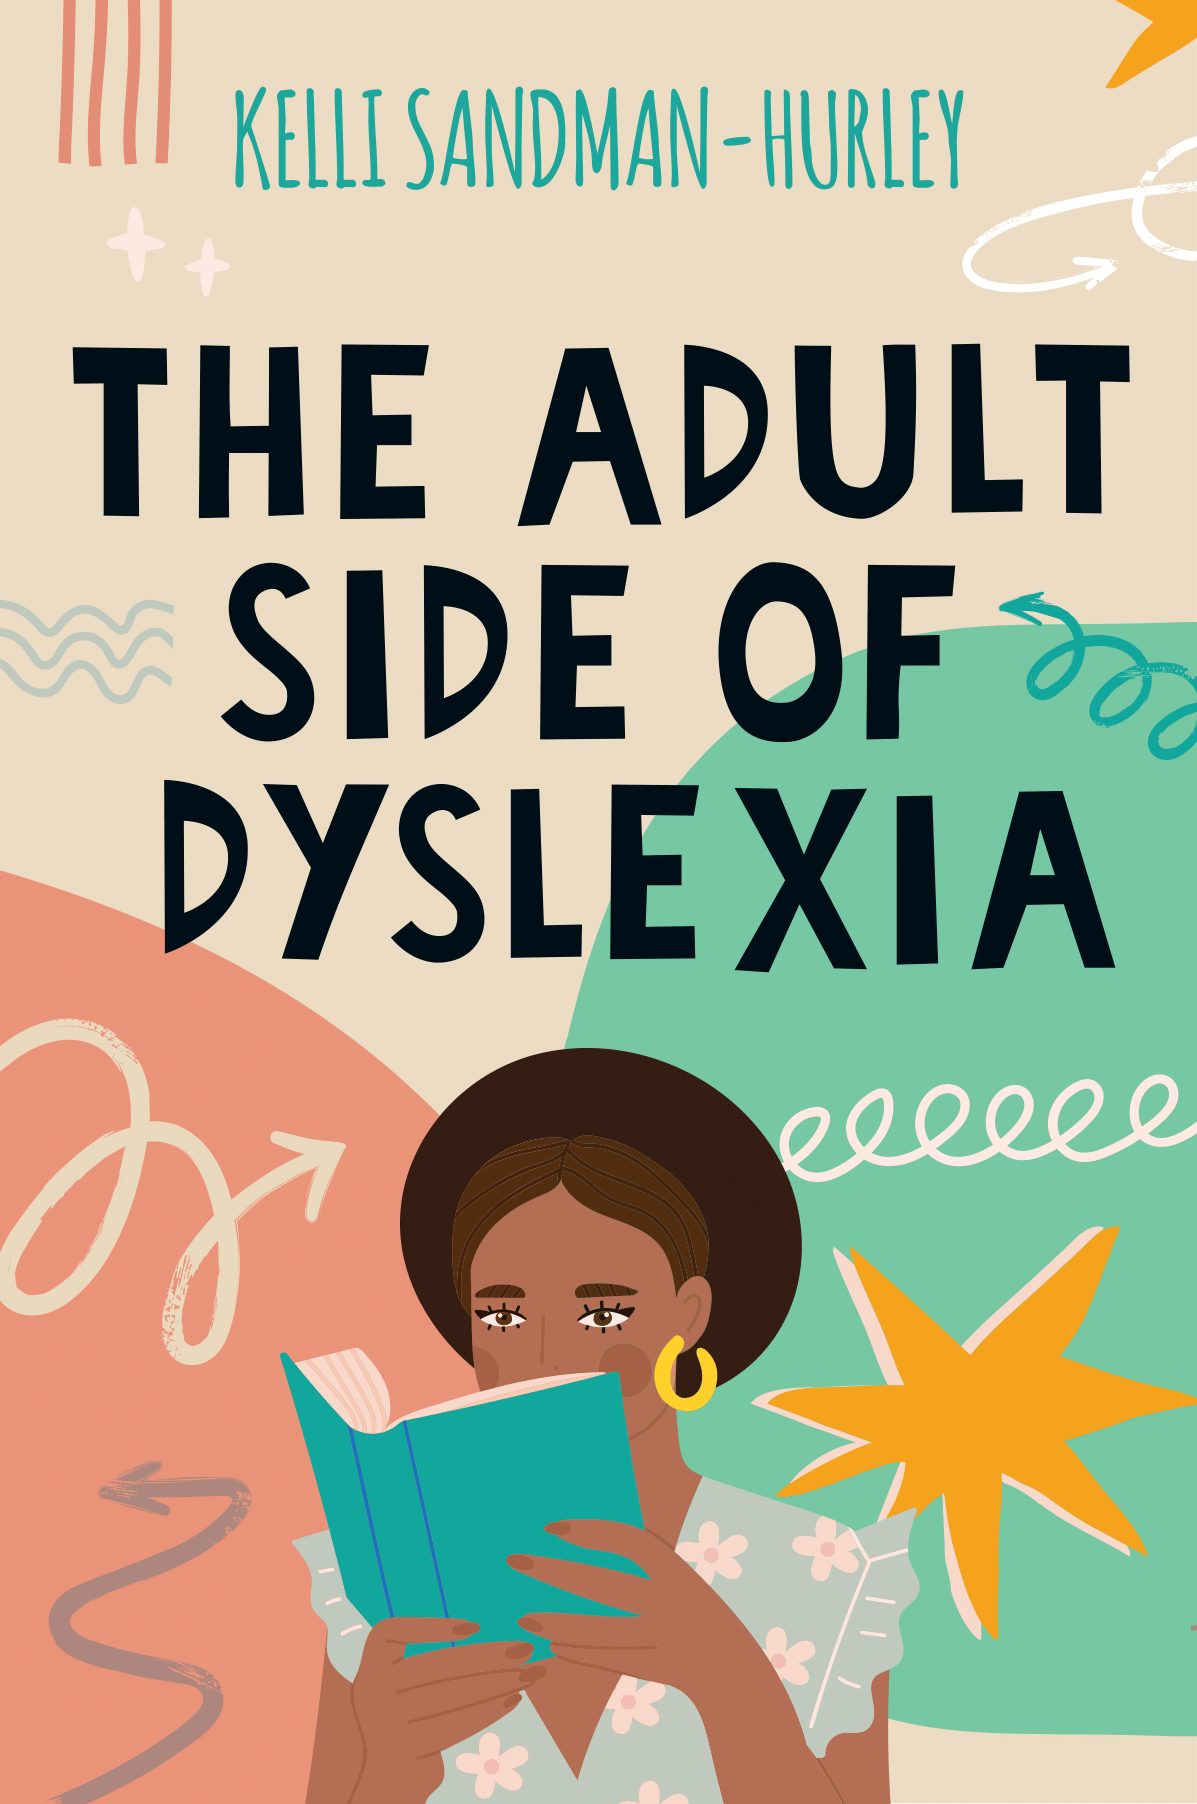 The Adult Side of Dyslexia